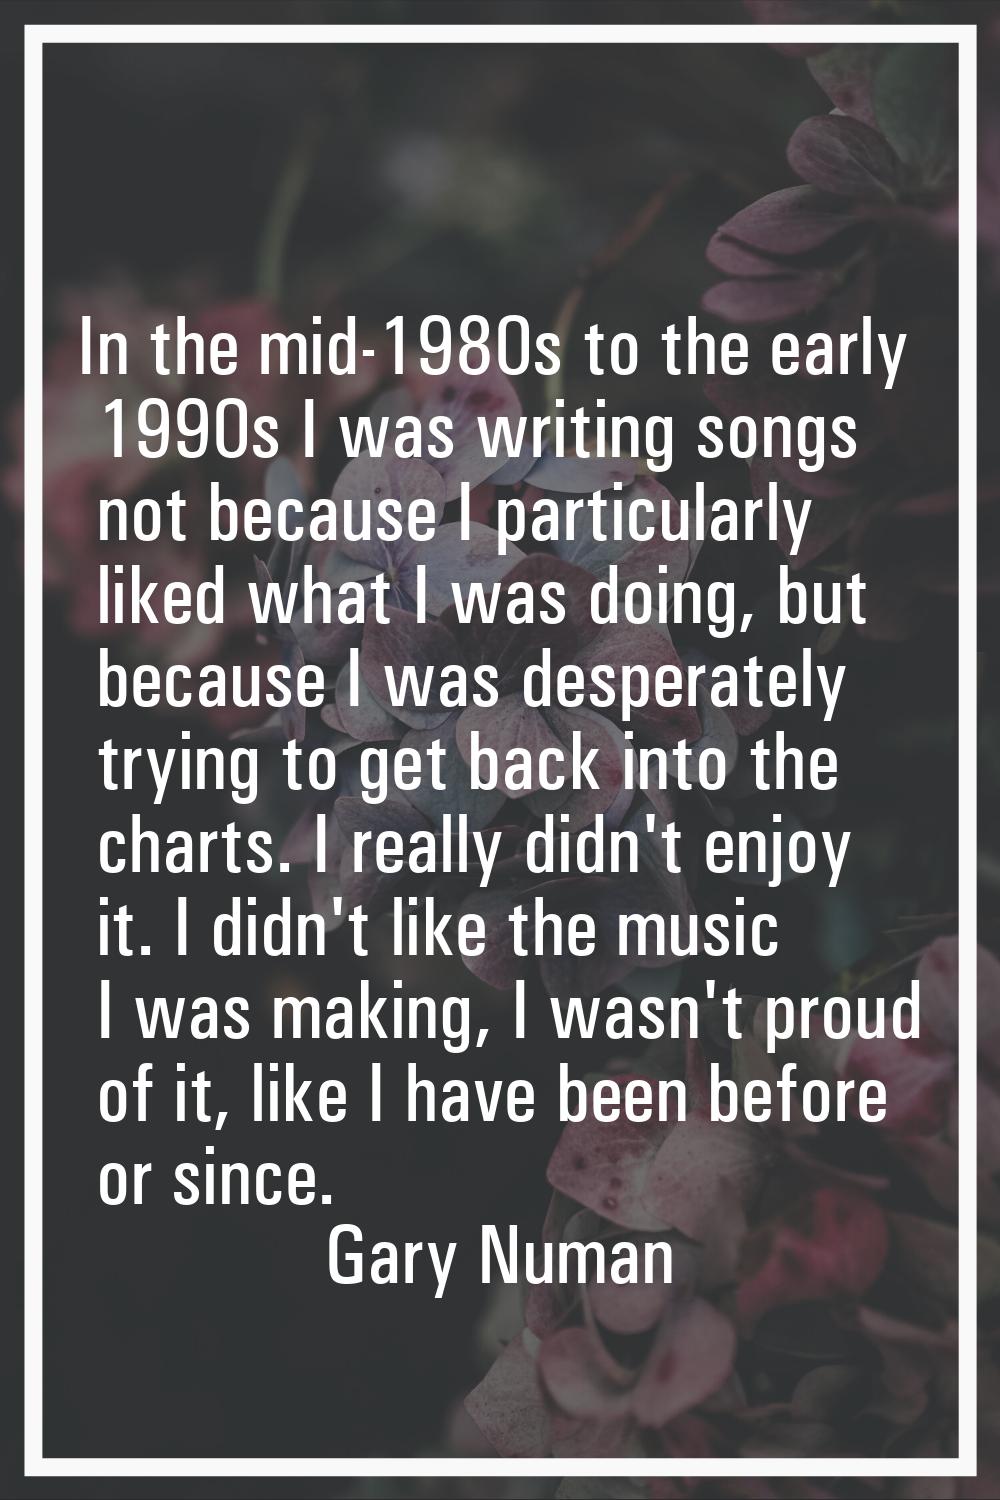 In the mid-1980s to the early 1990s I was writing songs not because I particularly liked what I was